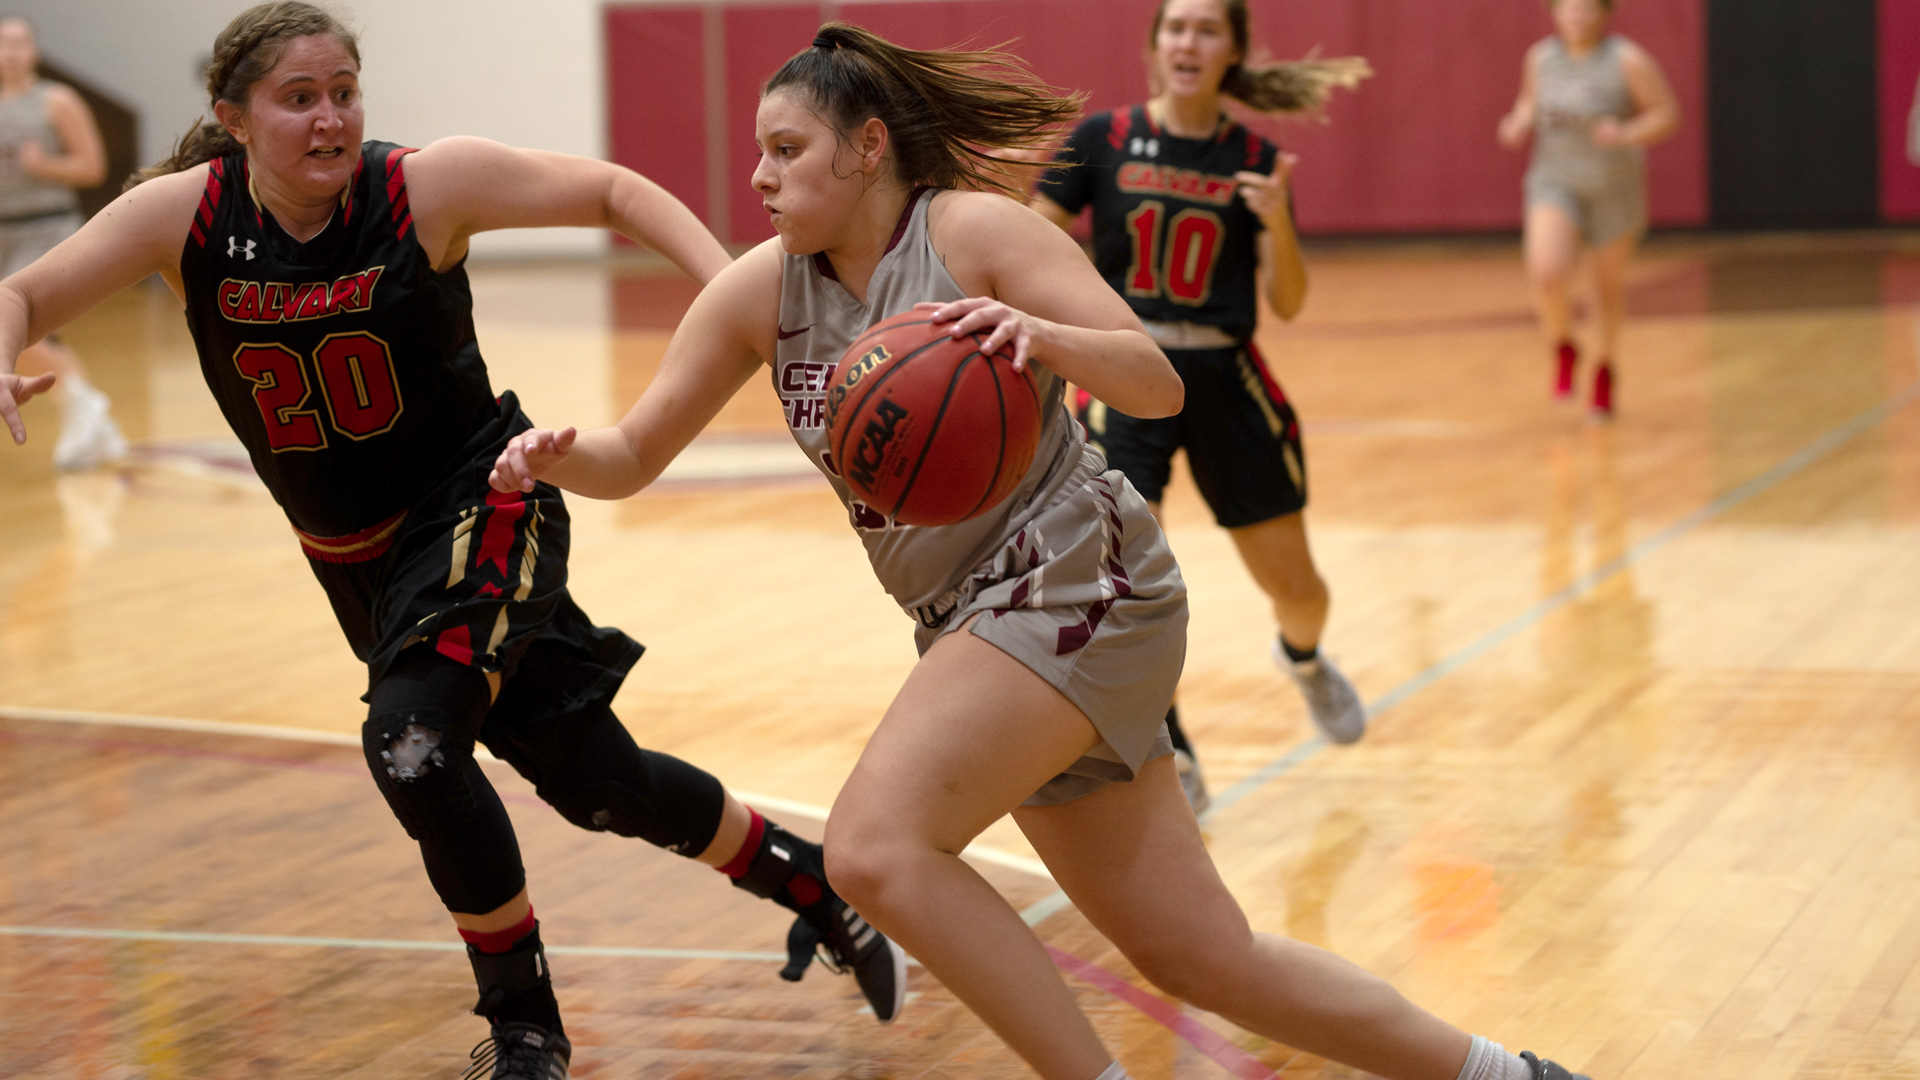 CCCB junior Vanessa Oyola scored a season-high 32 points on 7-for-16 shooting from behind the arc on Thursday during the Saints' 109-95 loss to Calvary University.